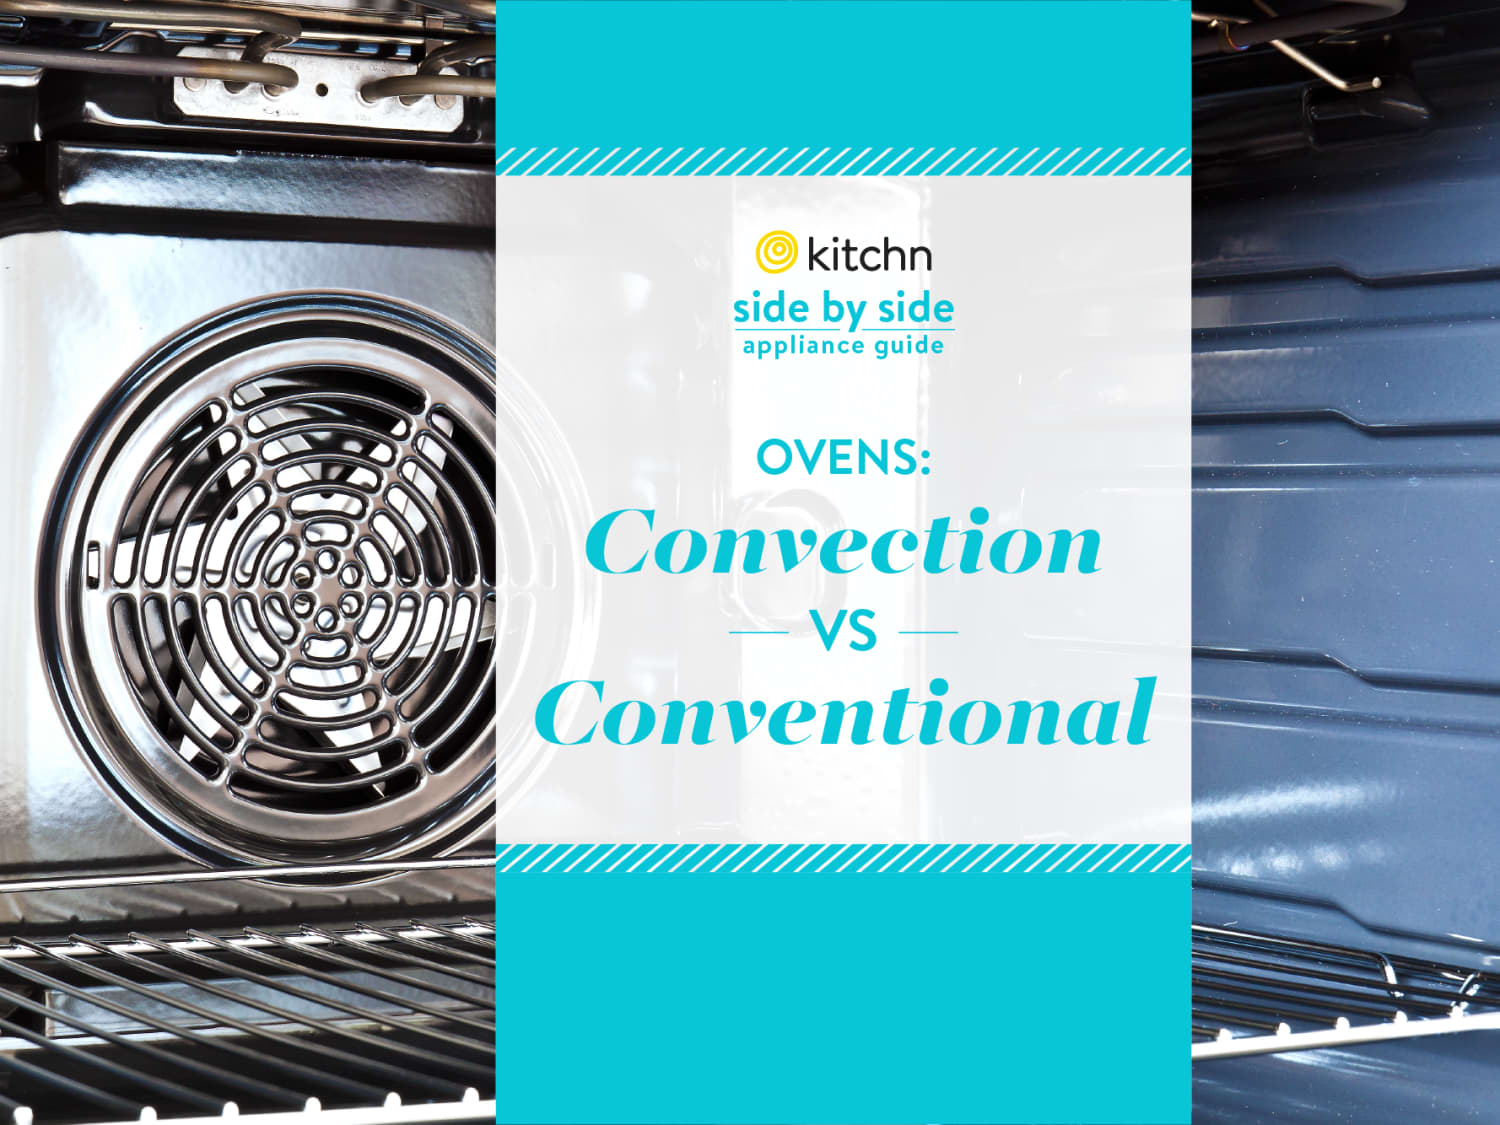 Convection vs. Conventional Oven: What's the Difference?